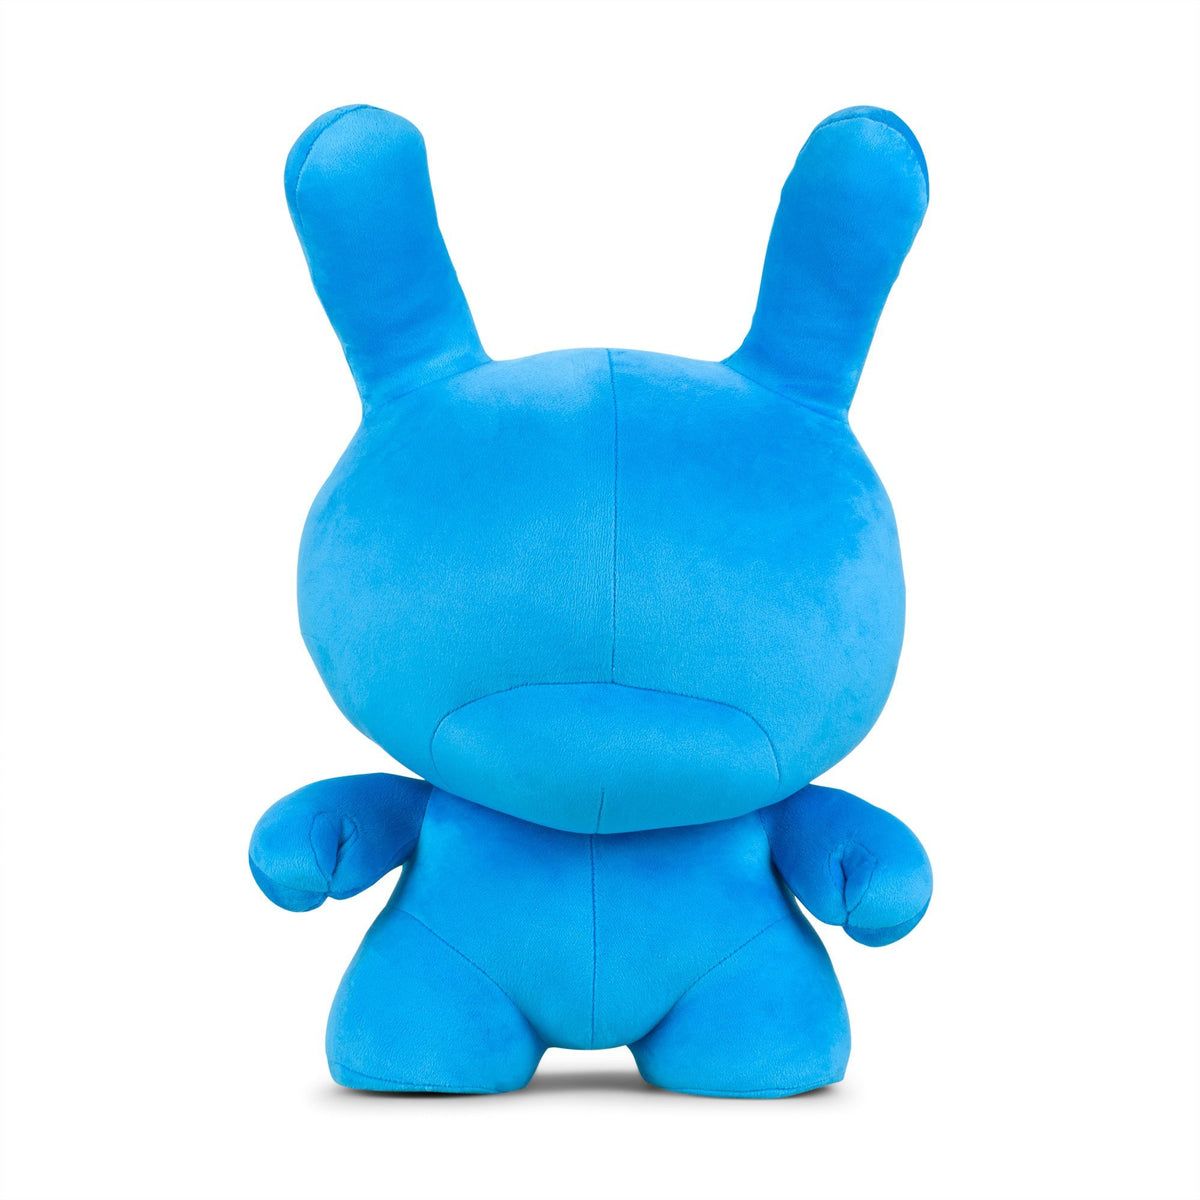 Shop All Kidrobot Art Toys, Collectibles, Apparel Now Tagged 